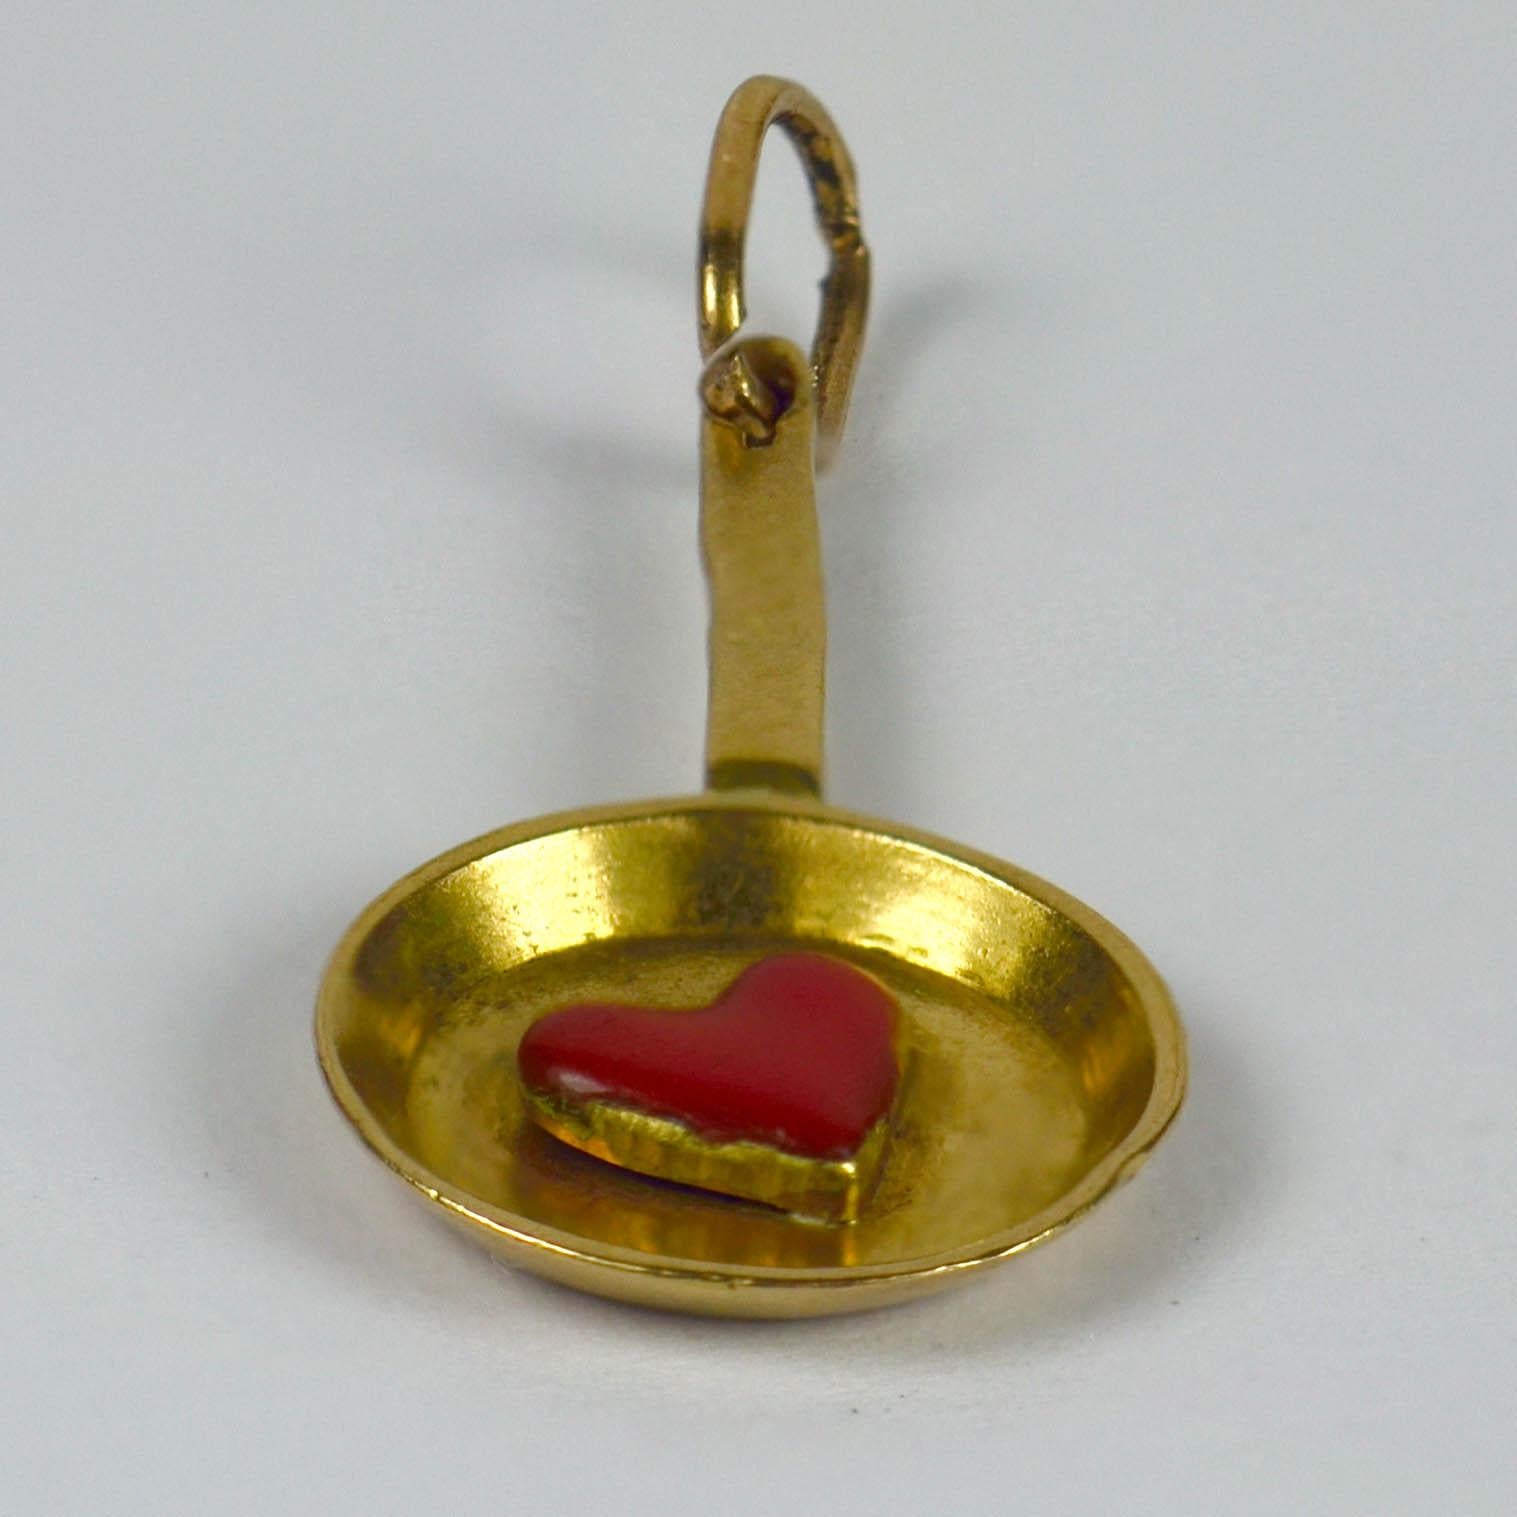 An 18 karat gold French charm pendant designed as a frying pan with a red enamel love heart to the centre. This is a play on words from 'fricassee' meaning at once 'frying' and an 'exchange of kisses'.
Stamped with the French eagles head poincon for